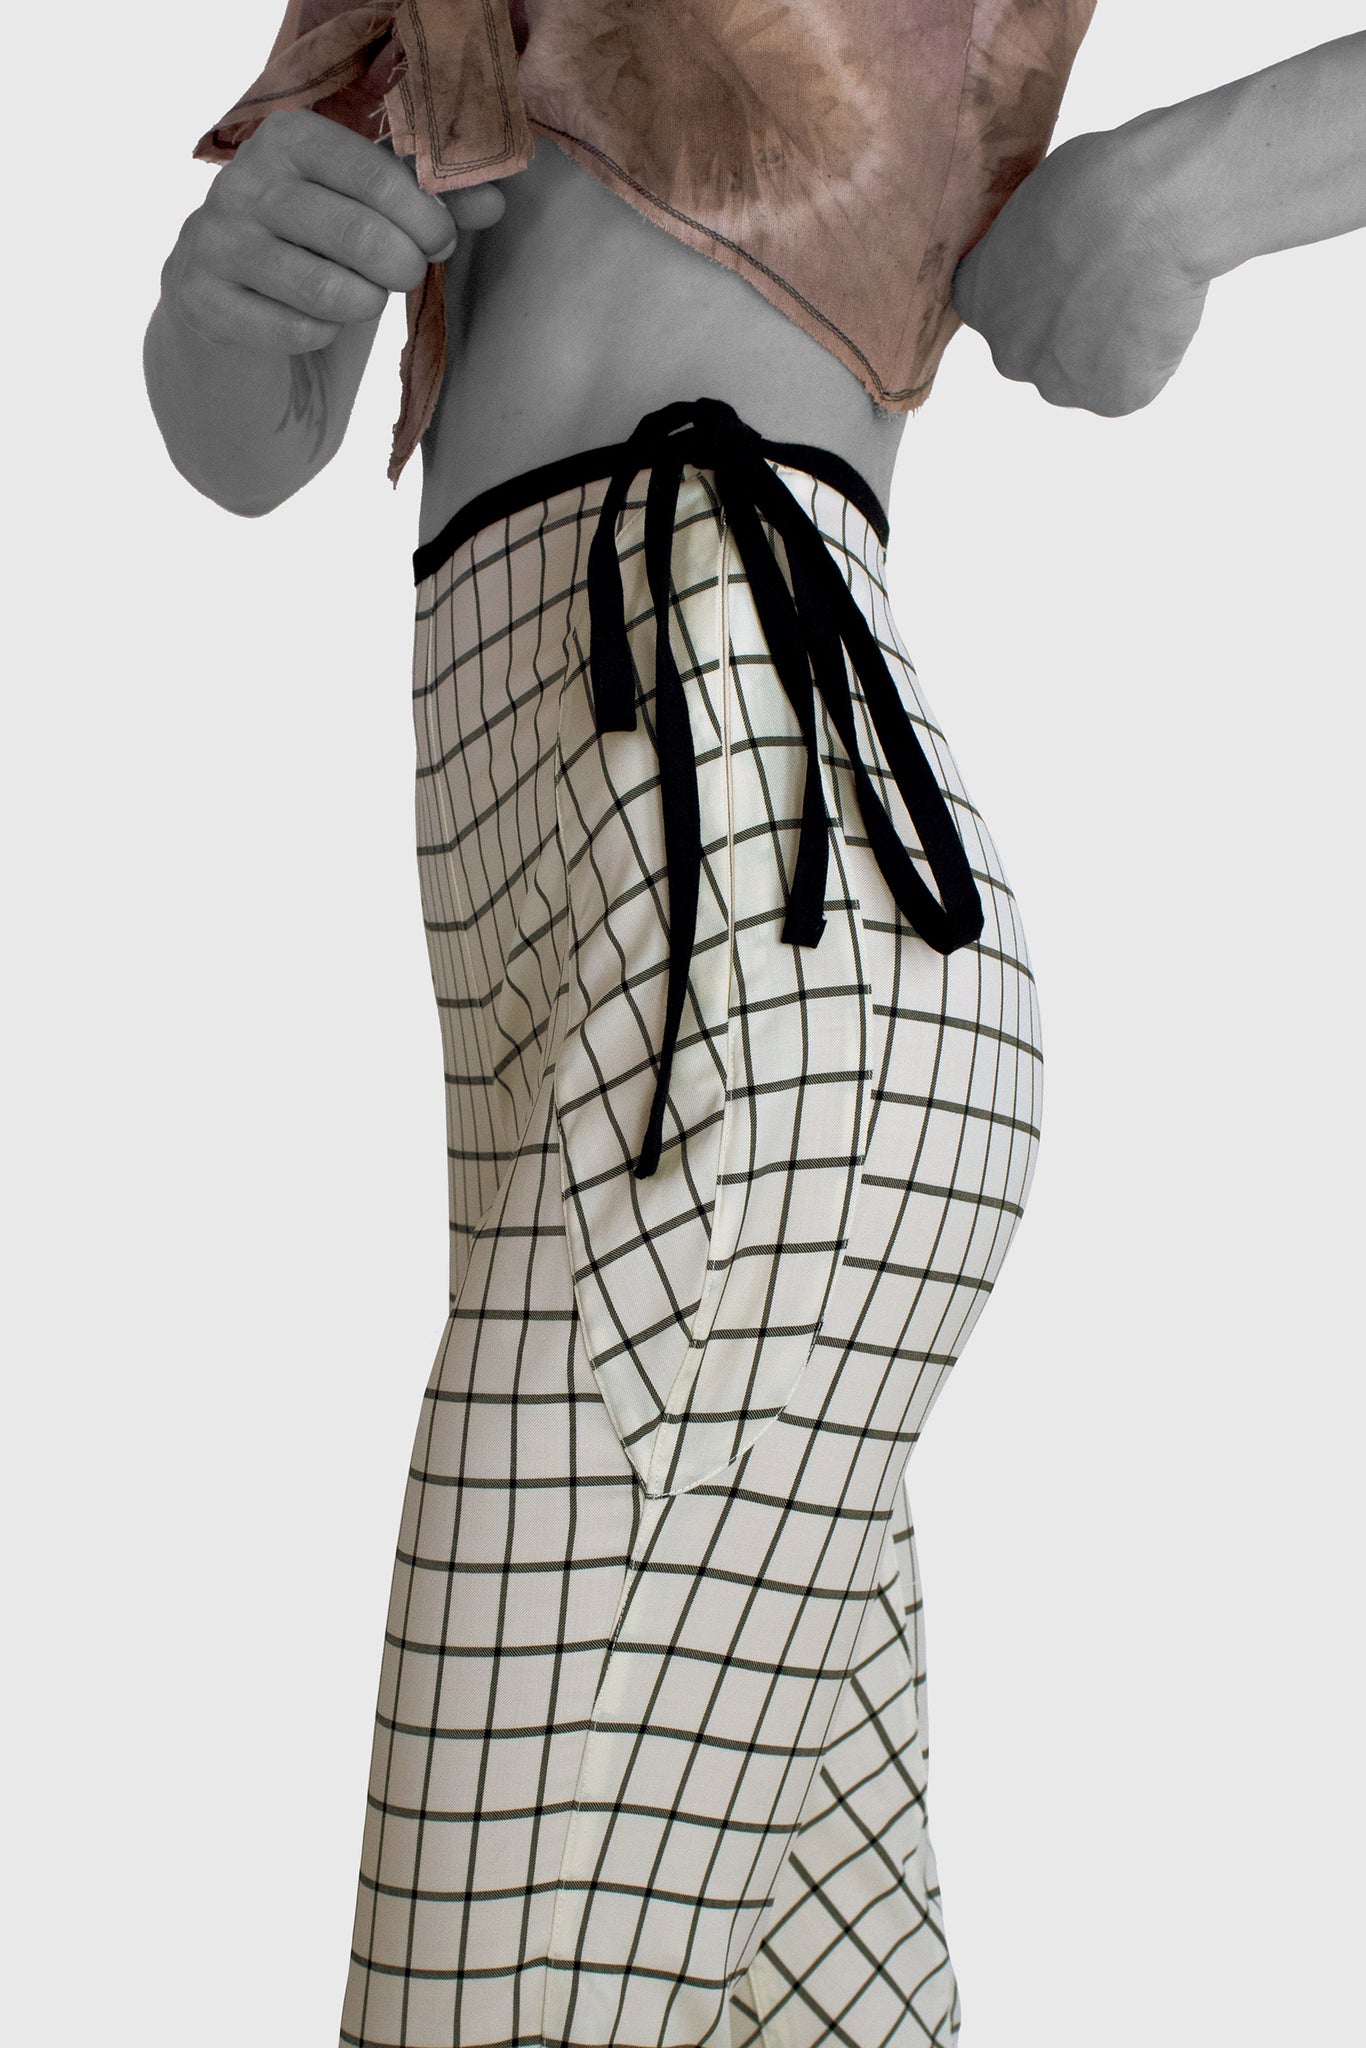 women's trousers, tailored shaped, slim fit, on the body, 100% wool, no elastane, side zipper closure with string, black on white grid pattern, elongating and slimming your legs, graphic contrast, Bauhaus style, artsy serious look, spring summer outfit by Ruxandra